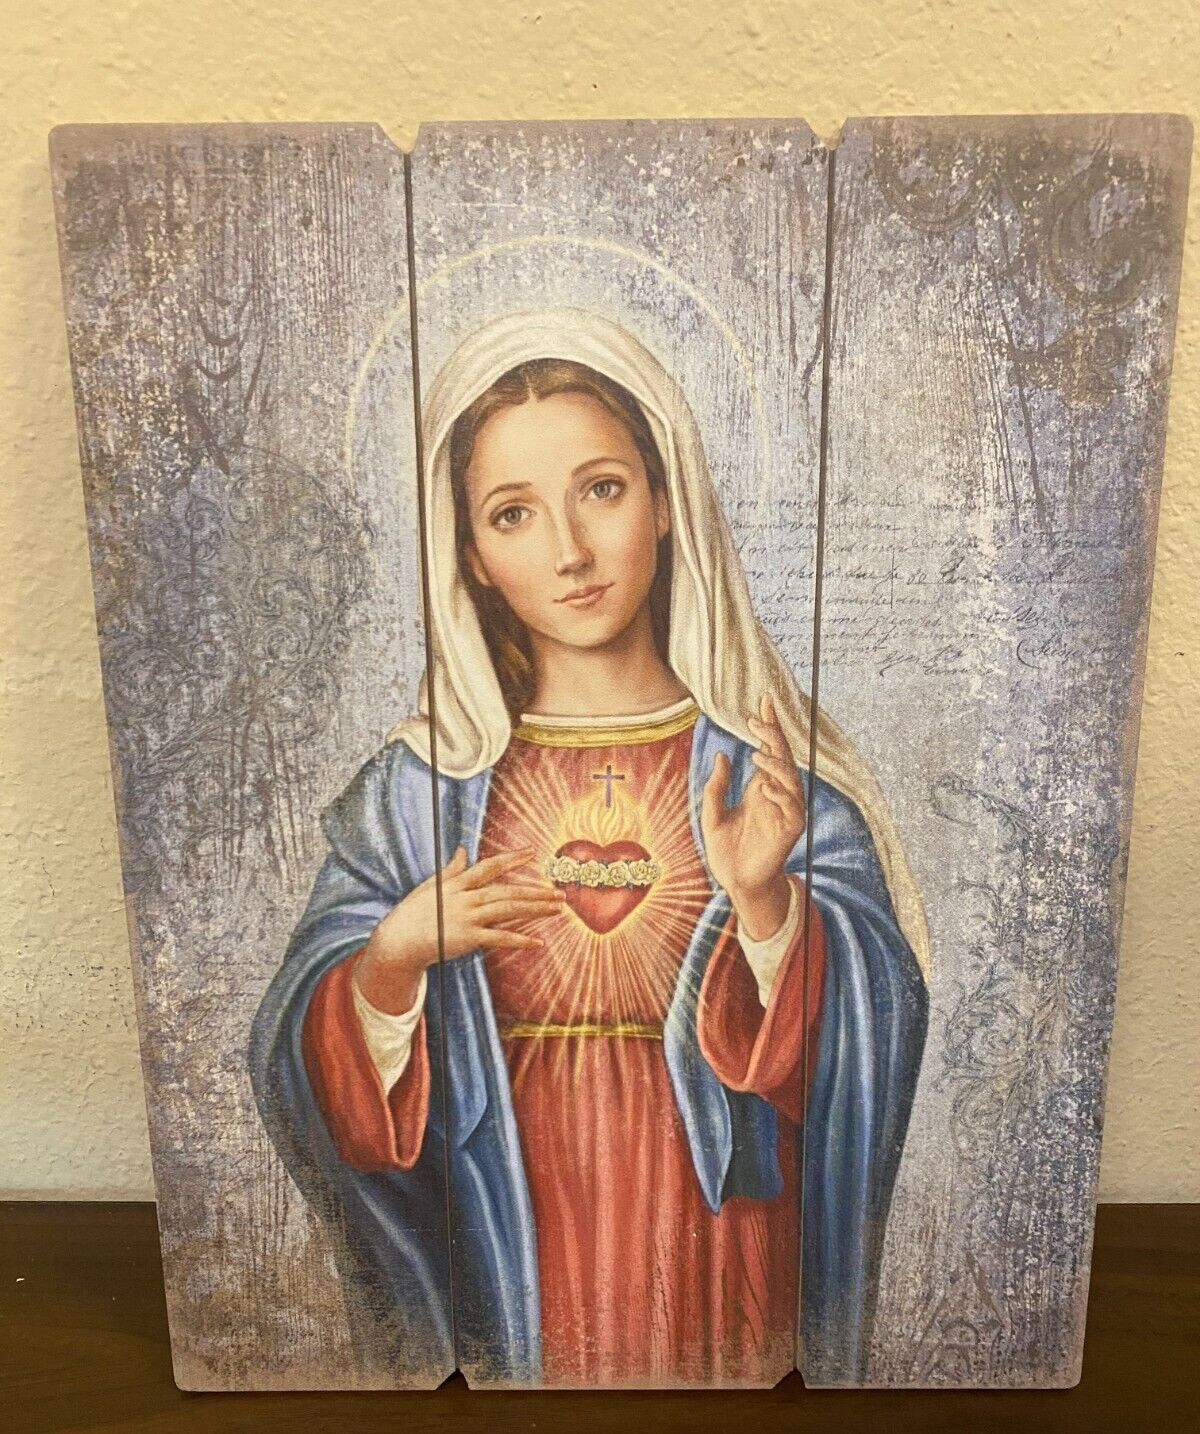 Immaculate Heart of Mary Image on Wood Pallet, New